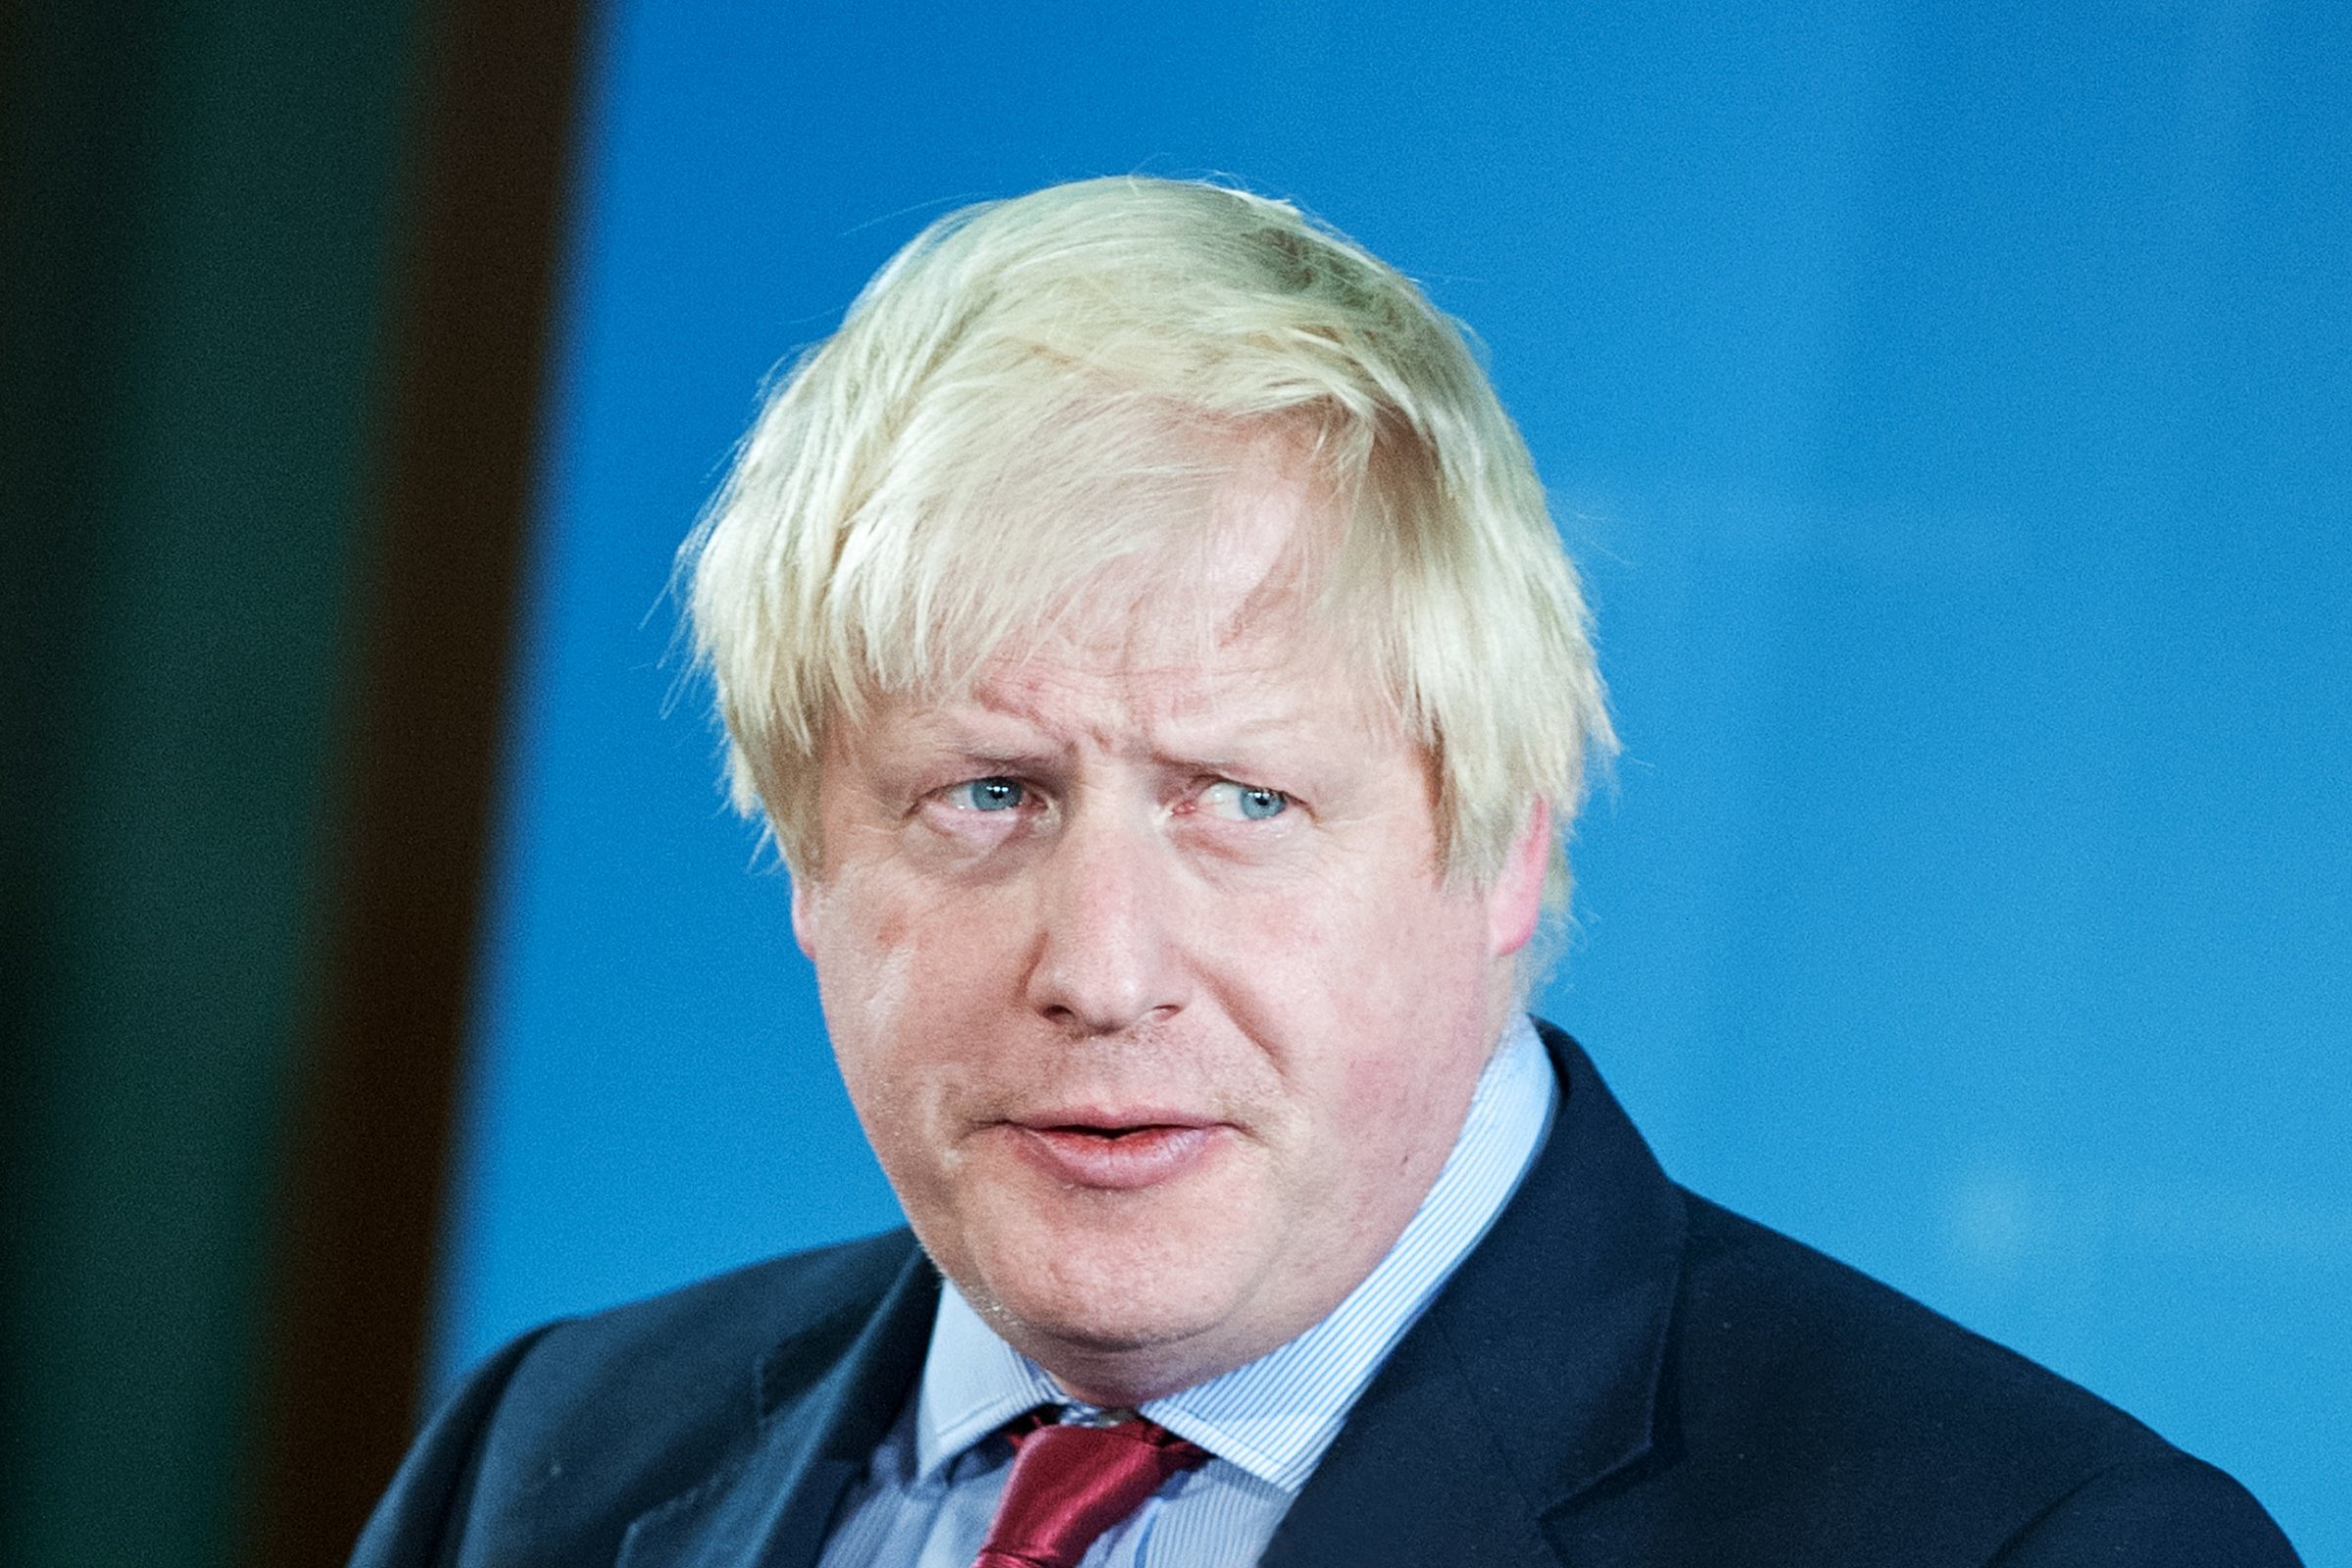 Boris and his burka: Criticising his language is not restricting free speech